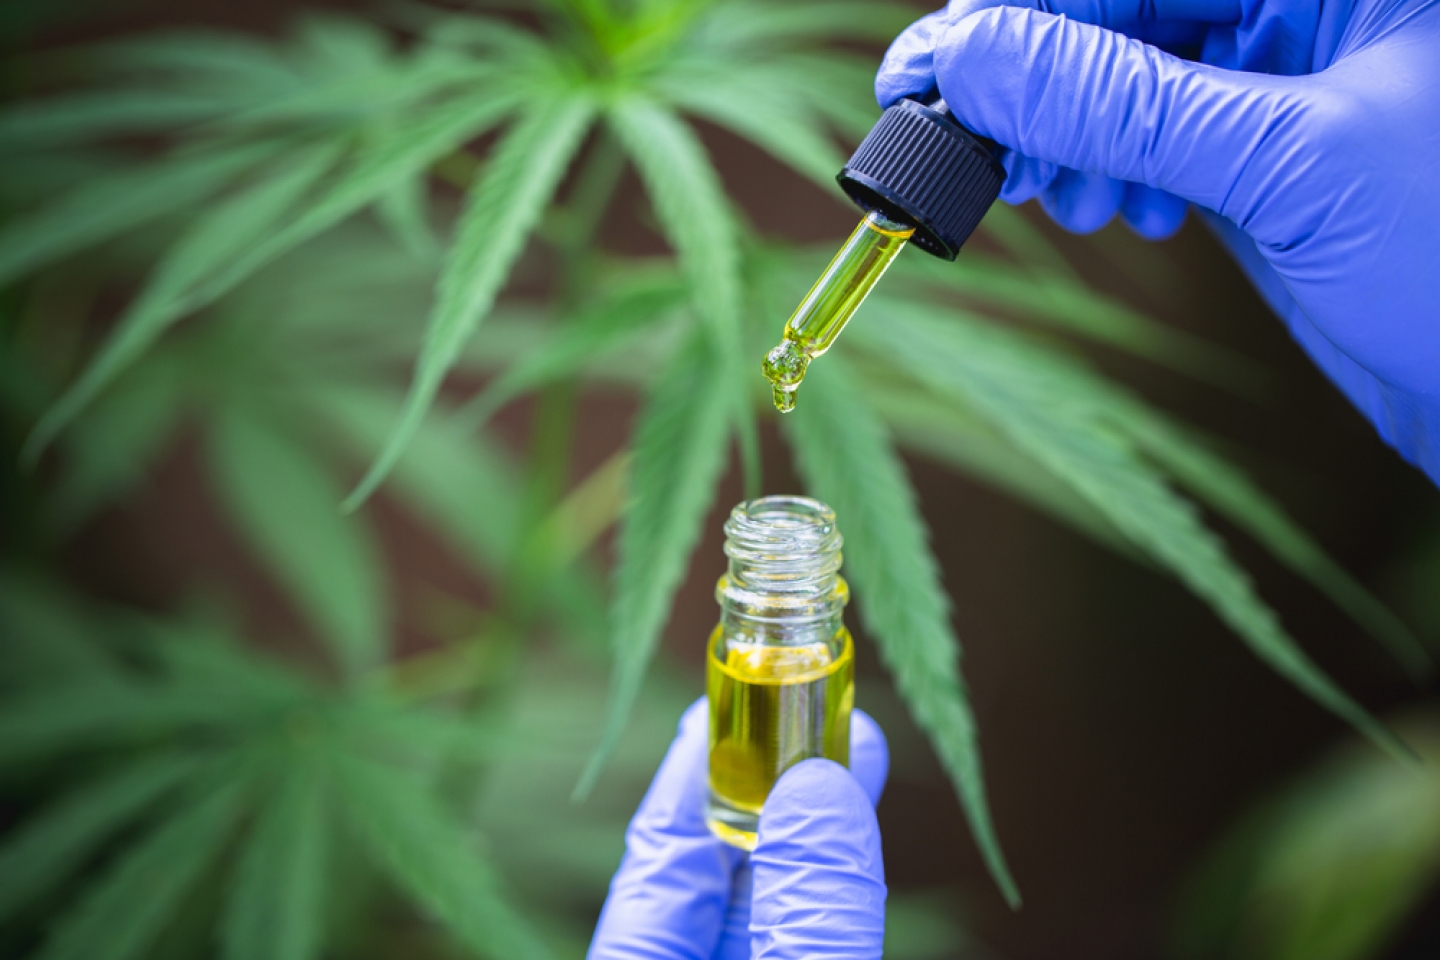 cannabis CBD oil hemp products, cannabis oil extracts in jars, patient medical marijuana and oil. alternative remedy or medication, medicine concept